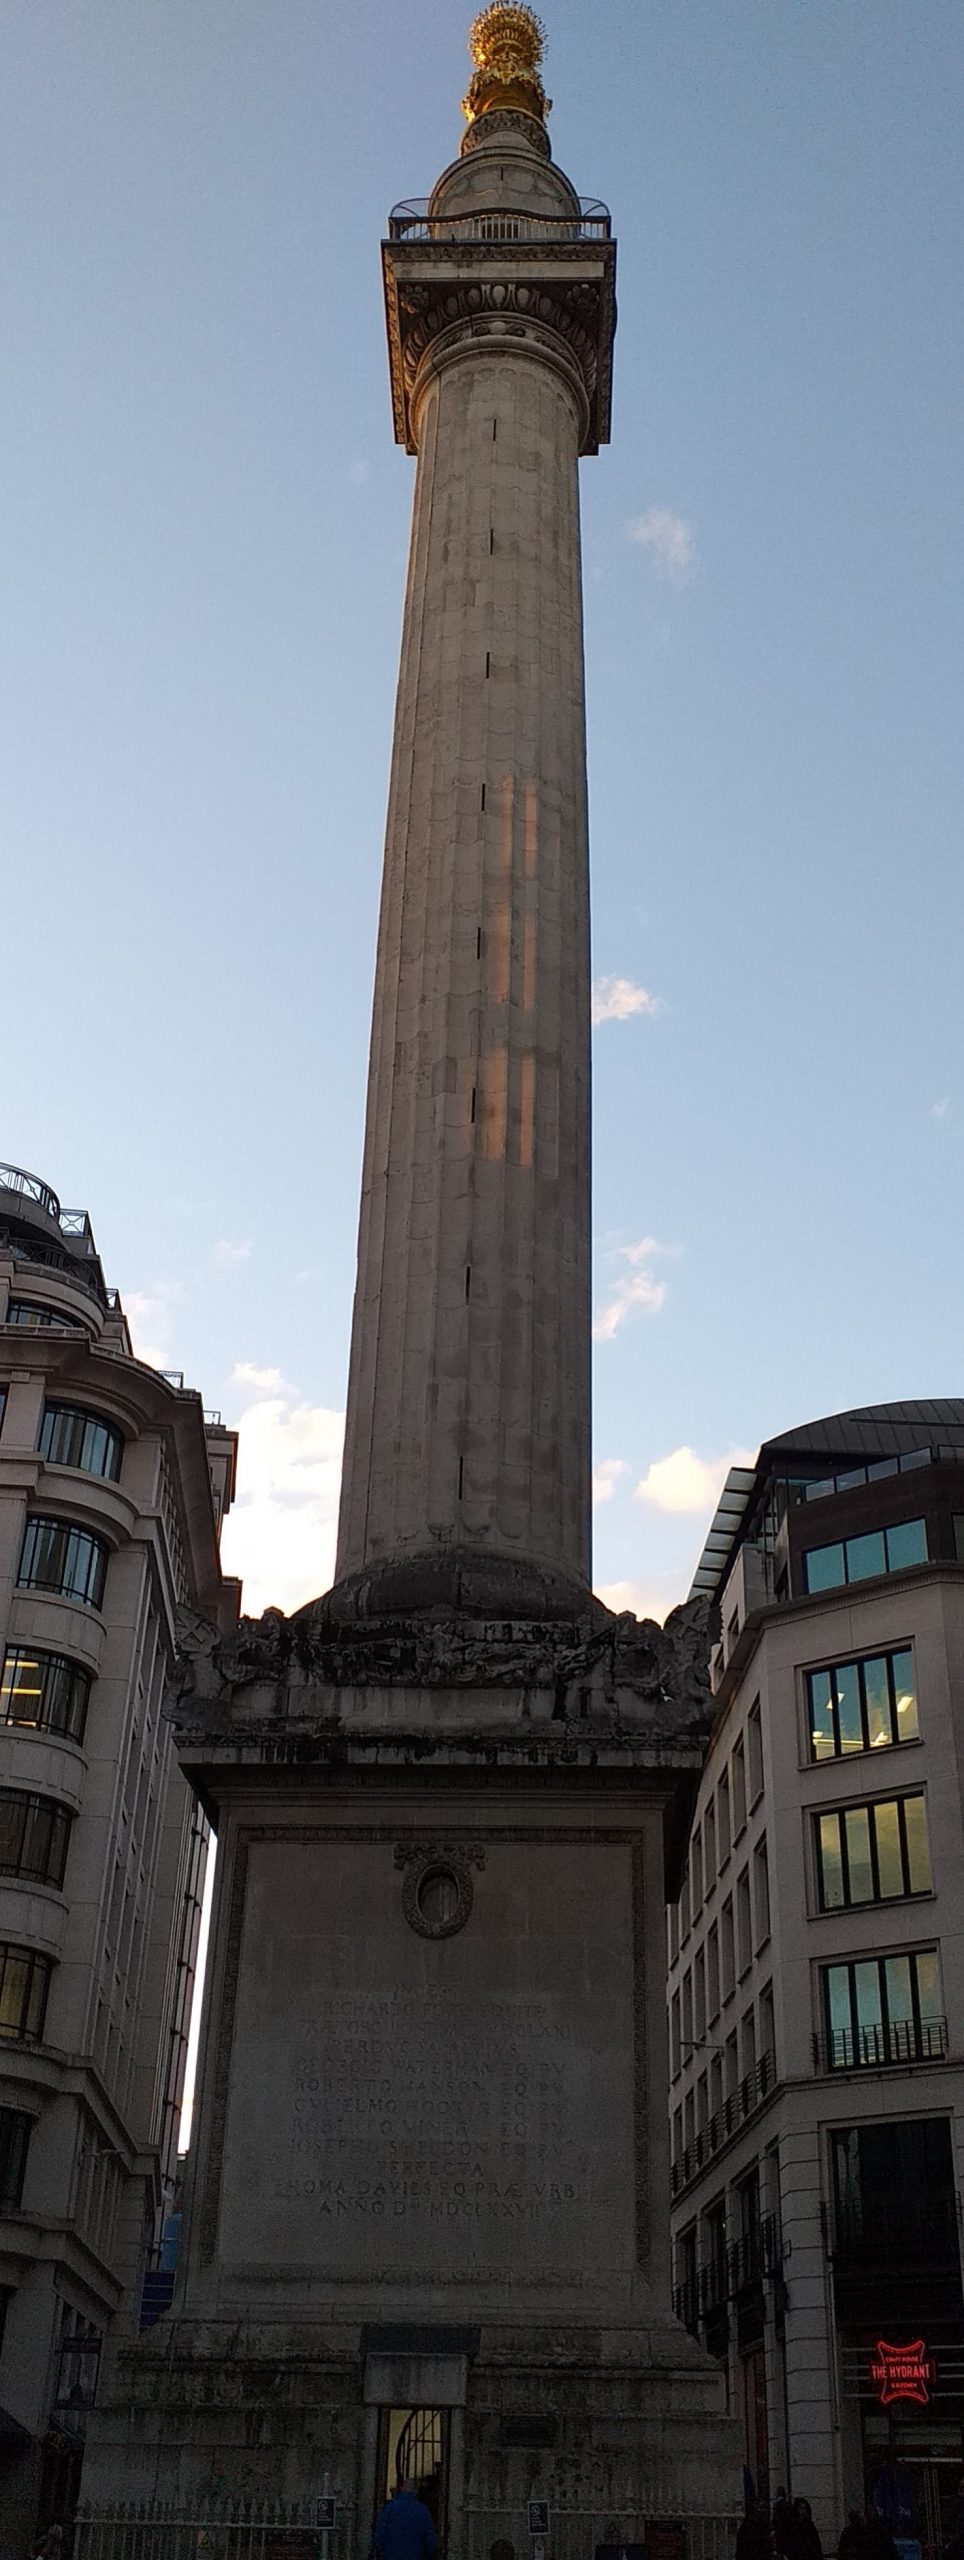 The Monument to the Great Fire of London was built as a telescope